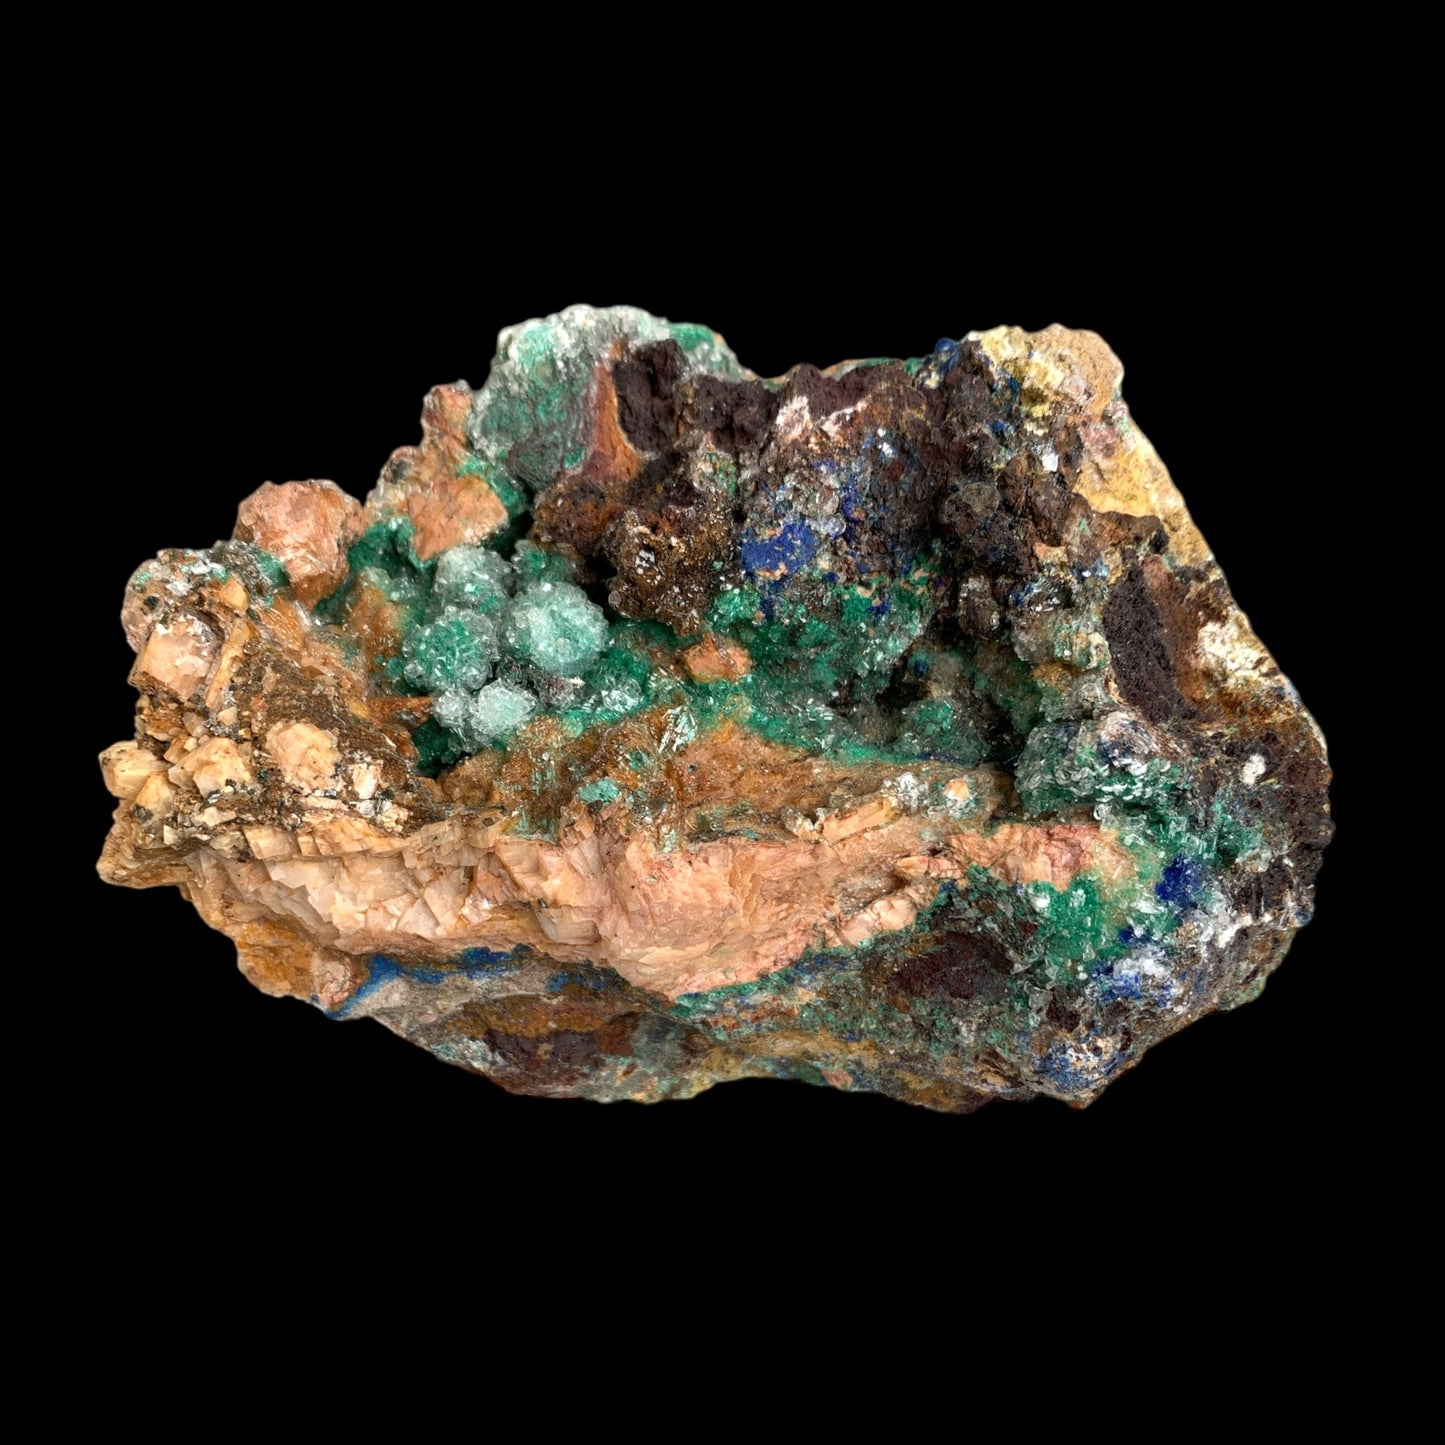 #1 Dolomite Rosasite with Malachite and Chrysocolla - 435g -5 inch - AAA Specimen 1 - Morocco